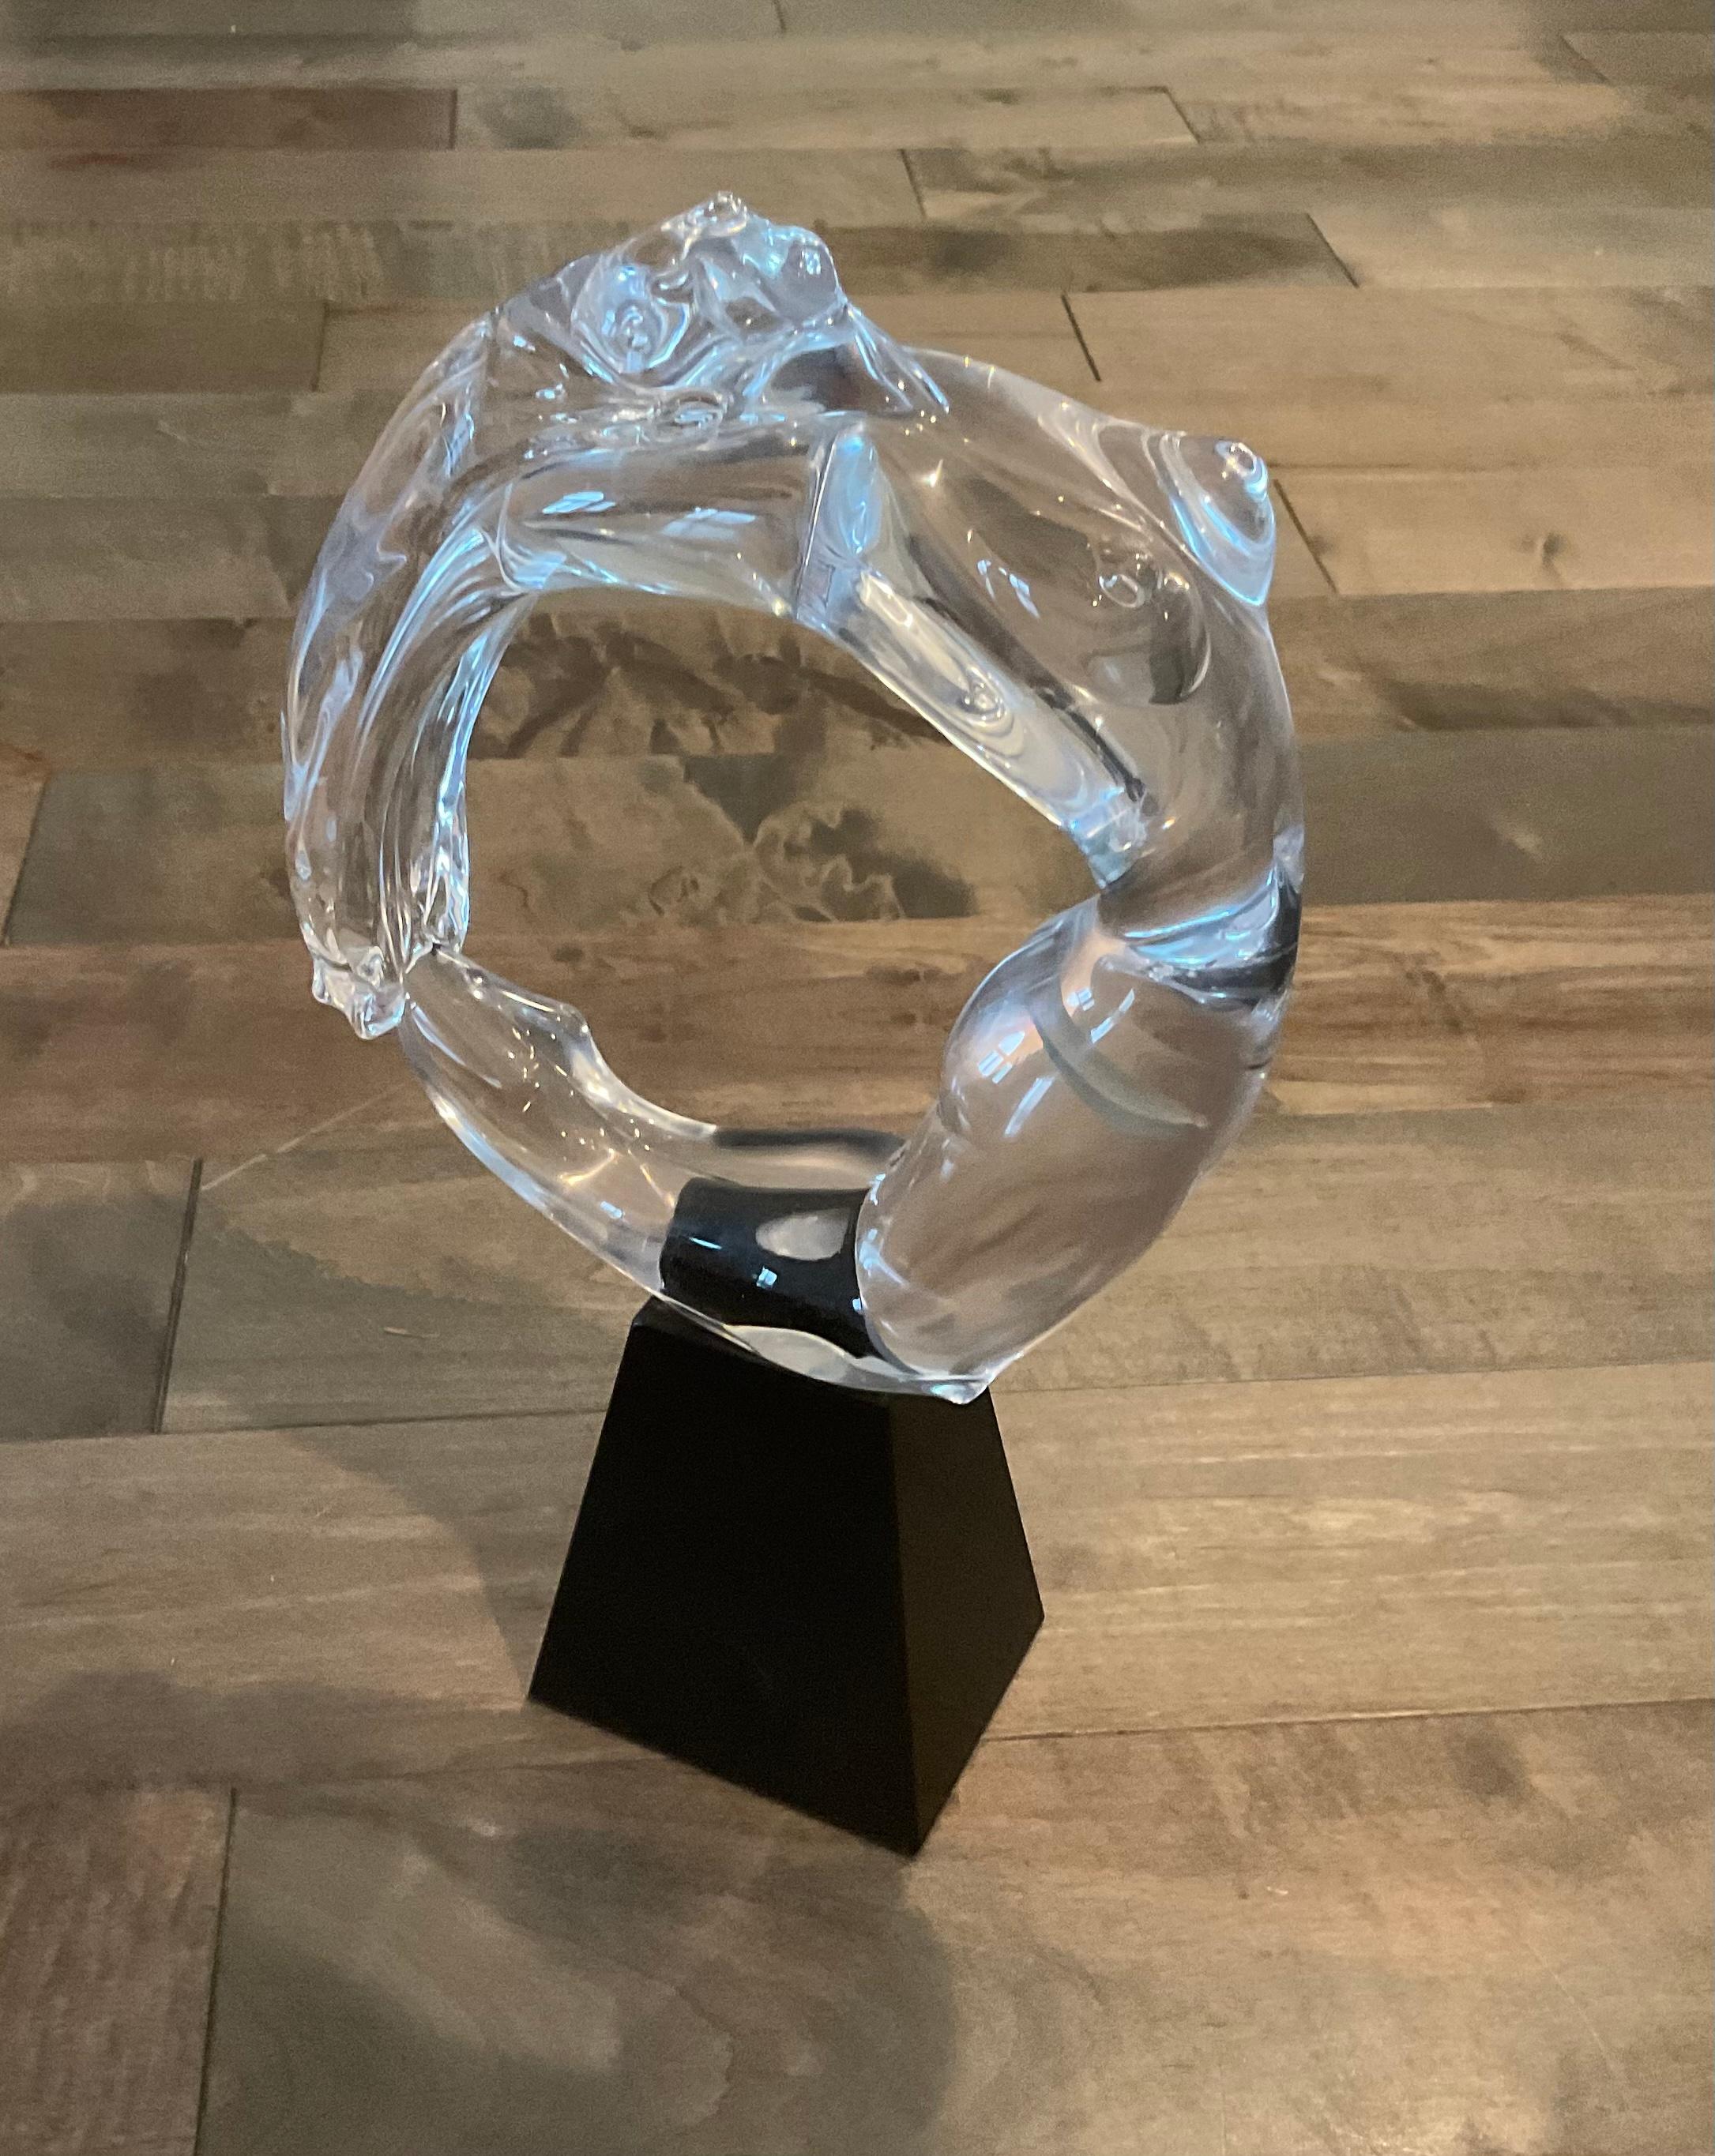 Pino Signoretto Murano Art Glass Nude Sculpture Signed by the Artist As shown. Very complicated nude sculpted into a circle applied to a black glass base.